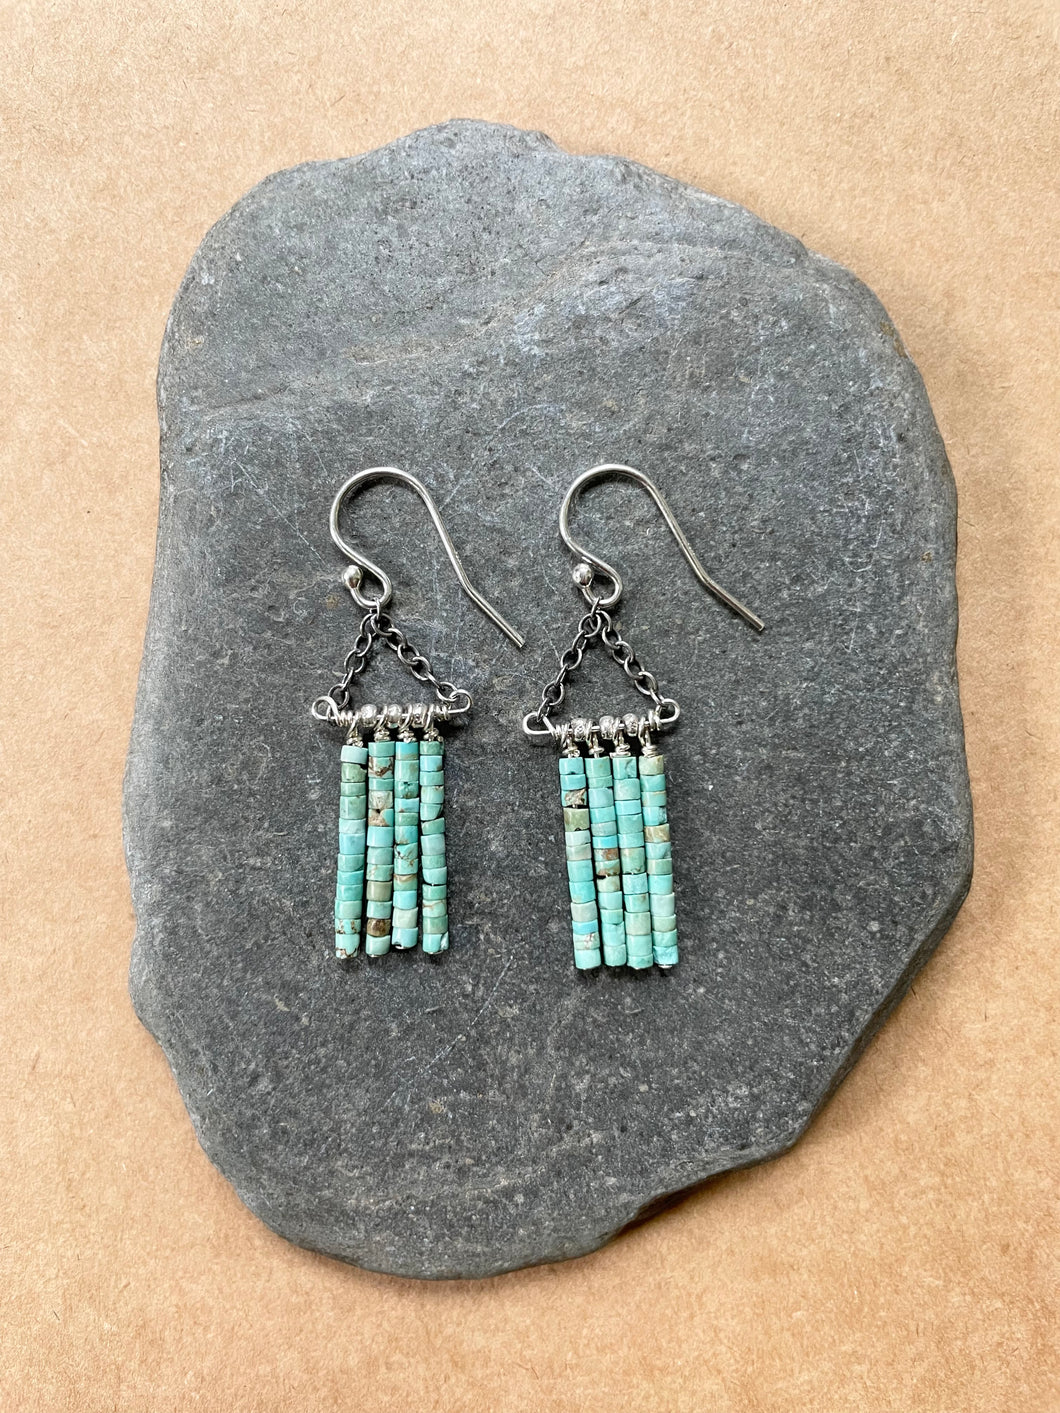 Turquoise dangle earrings. Turquoise beads with silver accents.